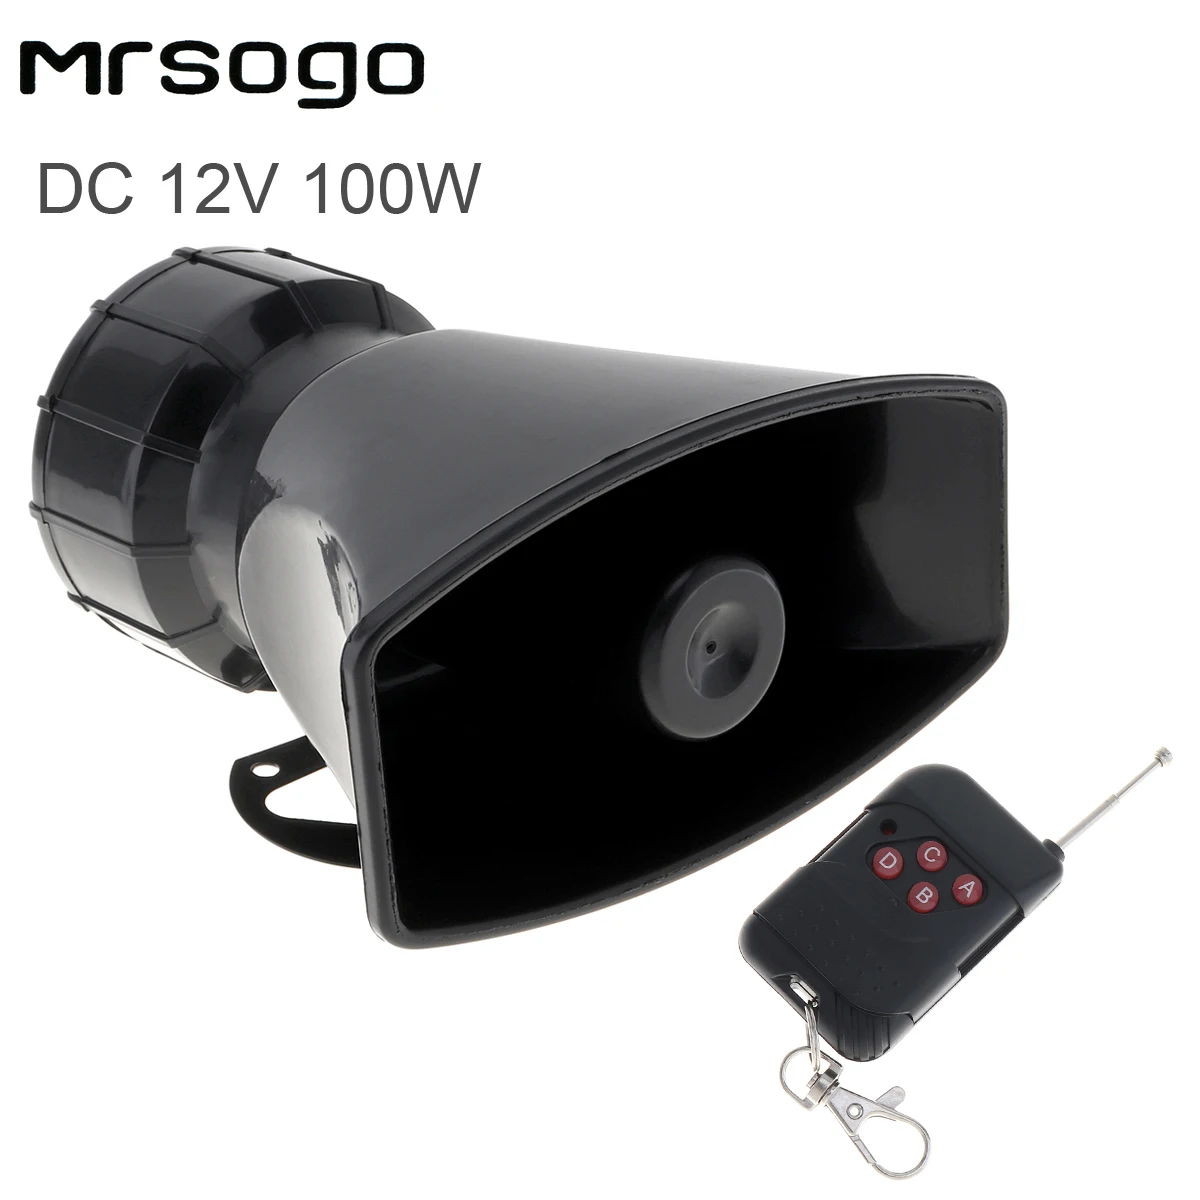 

12V 100W 7 Sounds Loud Car Warning Alarm Fire Siren Horn Speaker Loudspeakers with Remote Controller for Cars Vehicles